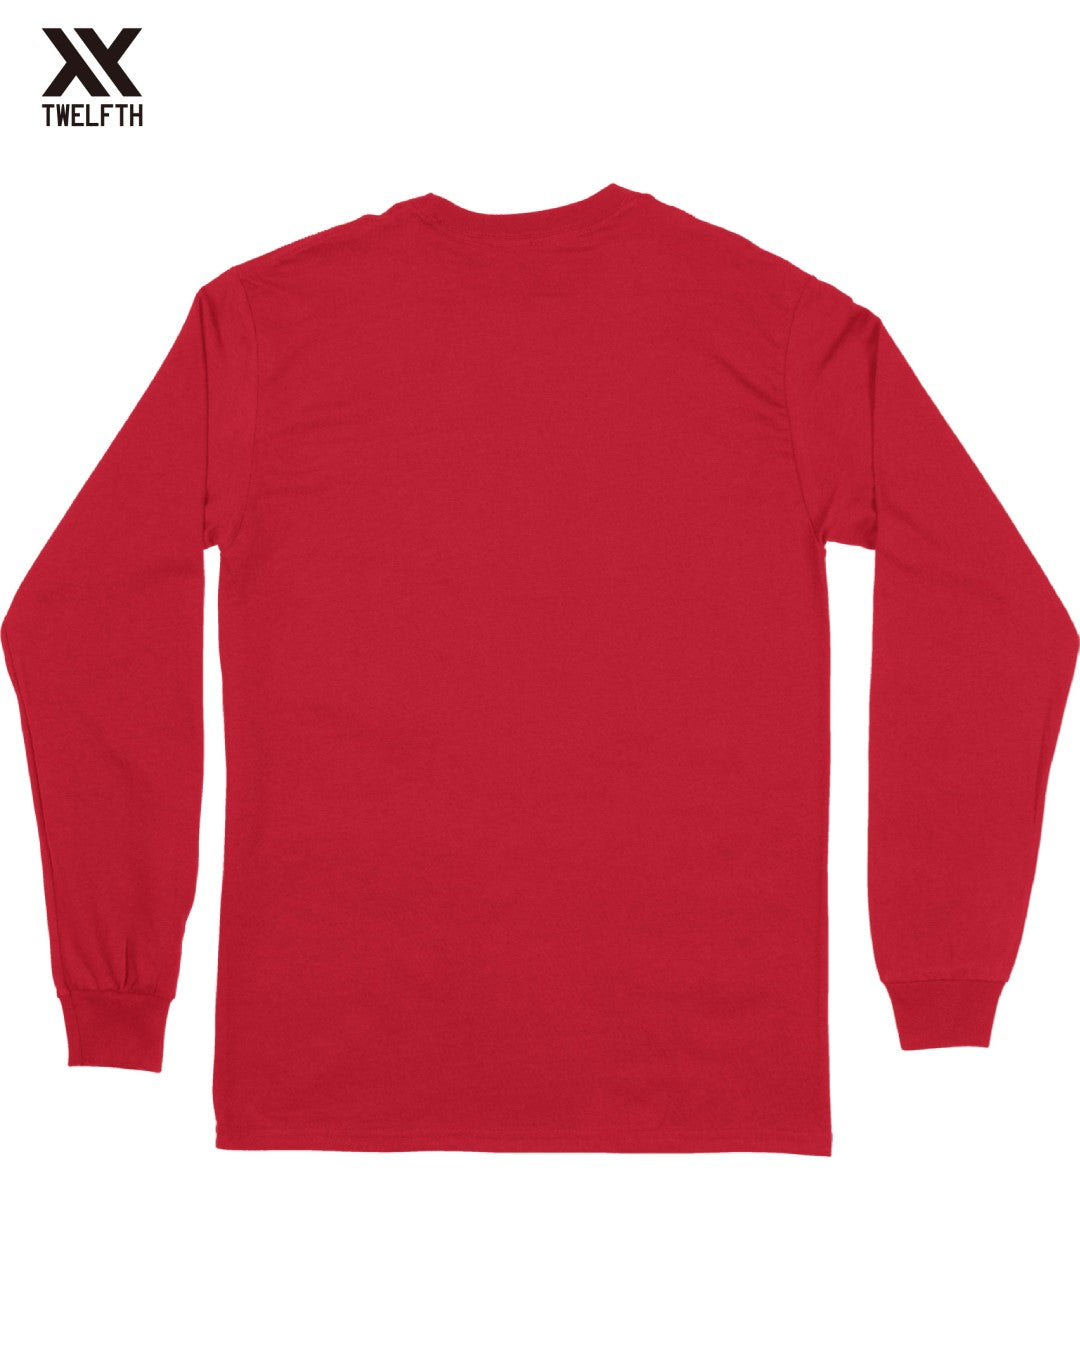 Chile Crest T-Shirt - Mens - Long Sleeve